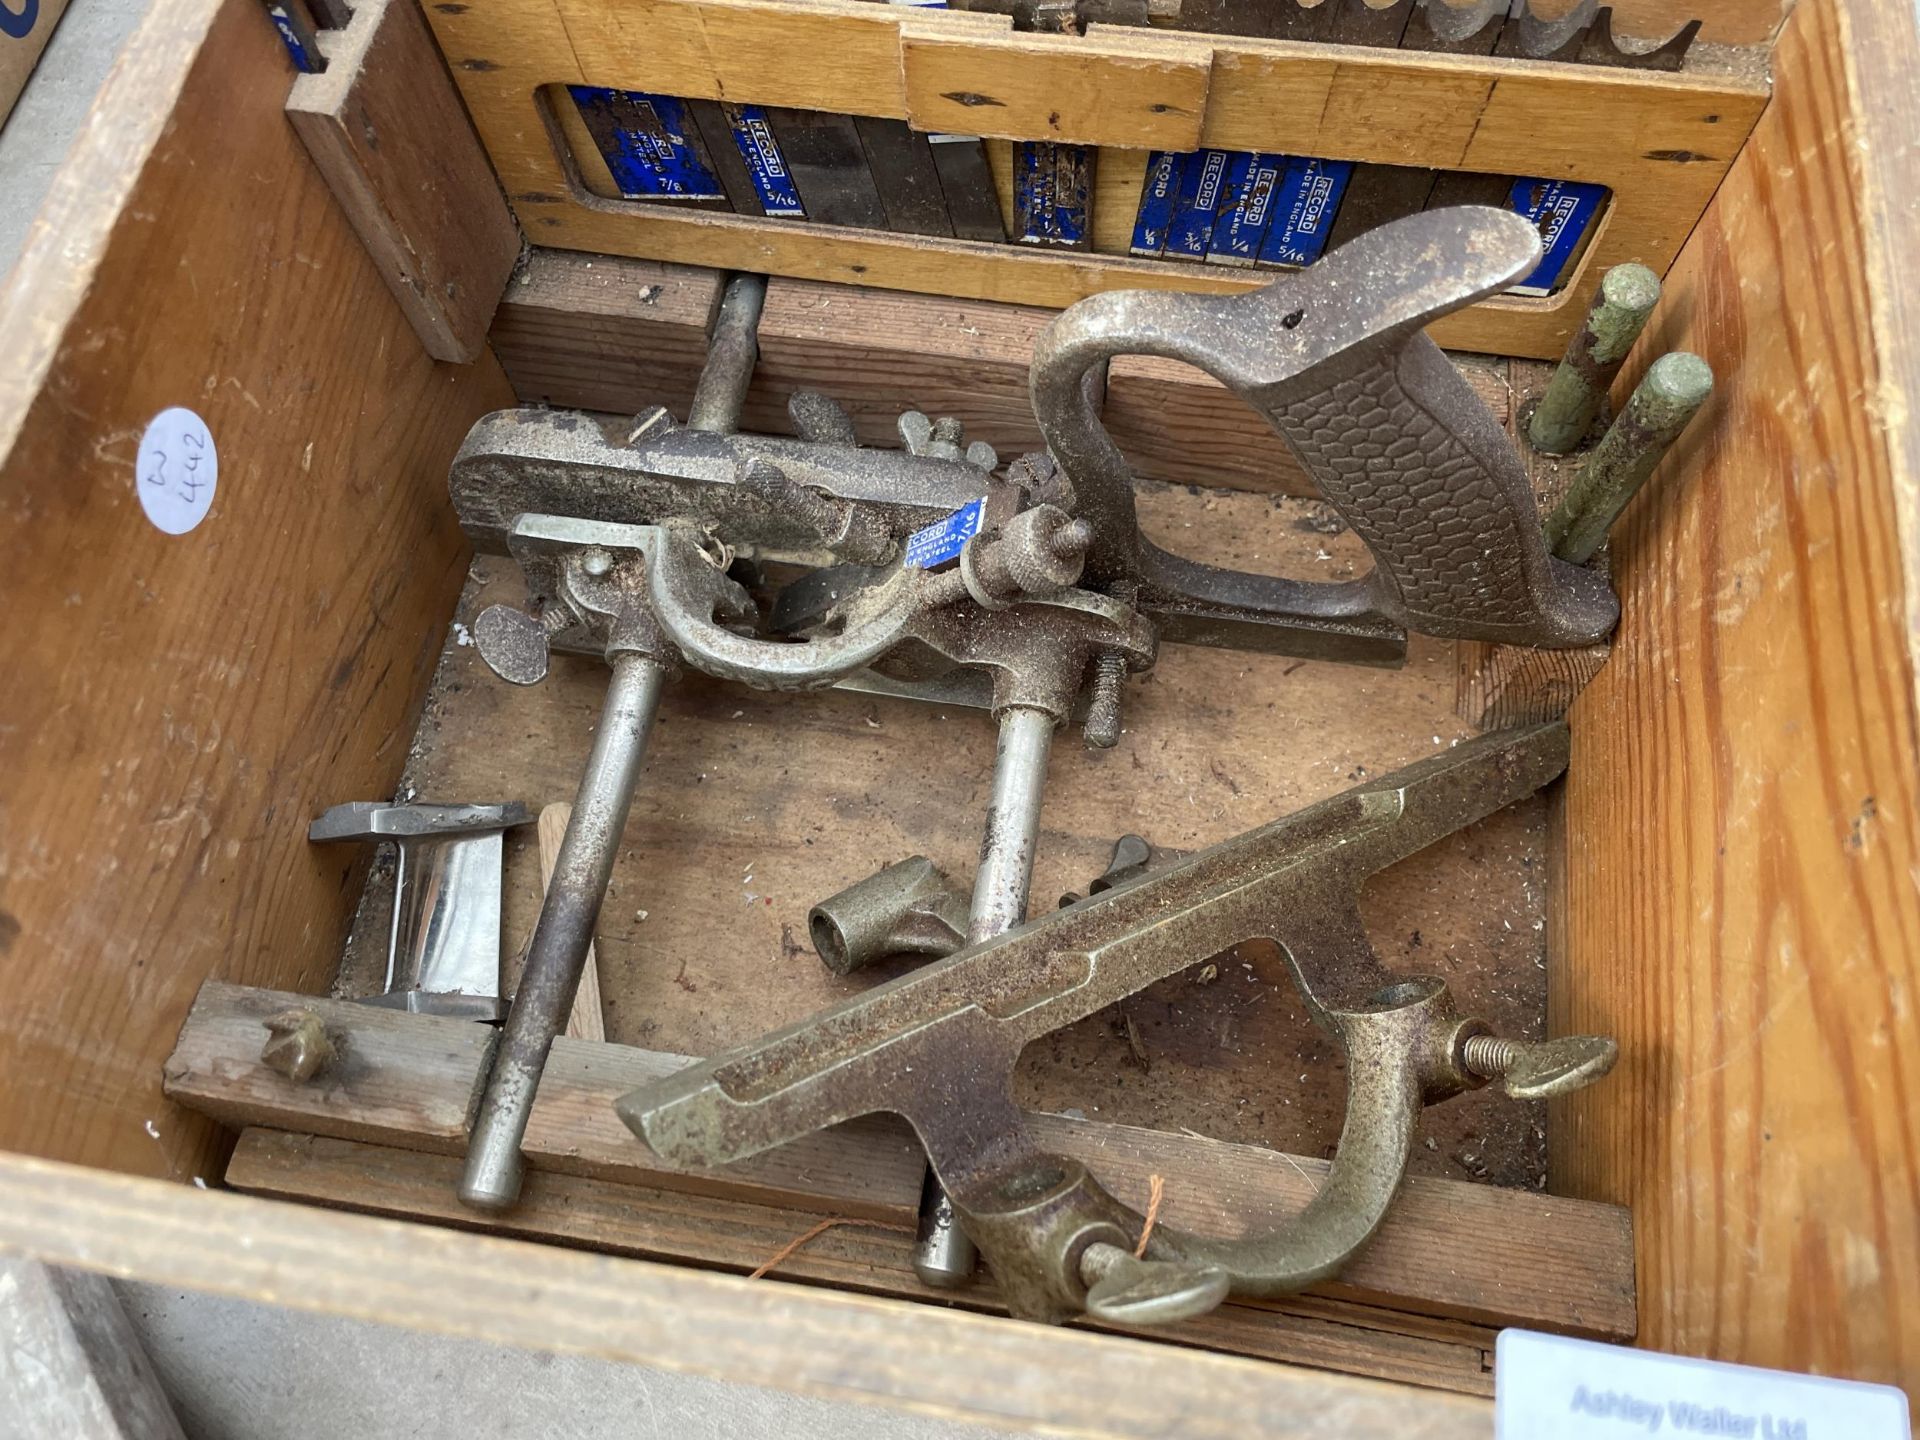 AN ASSORTMENT OF HAND TOOLS TO INCLUDE A WOOD PLANE, CHISELS AND A BRACE DRILL ETC - Bild 4 aus 4